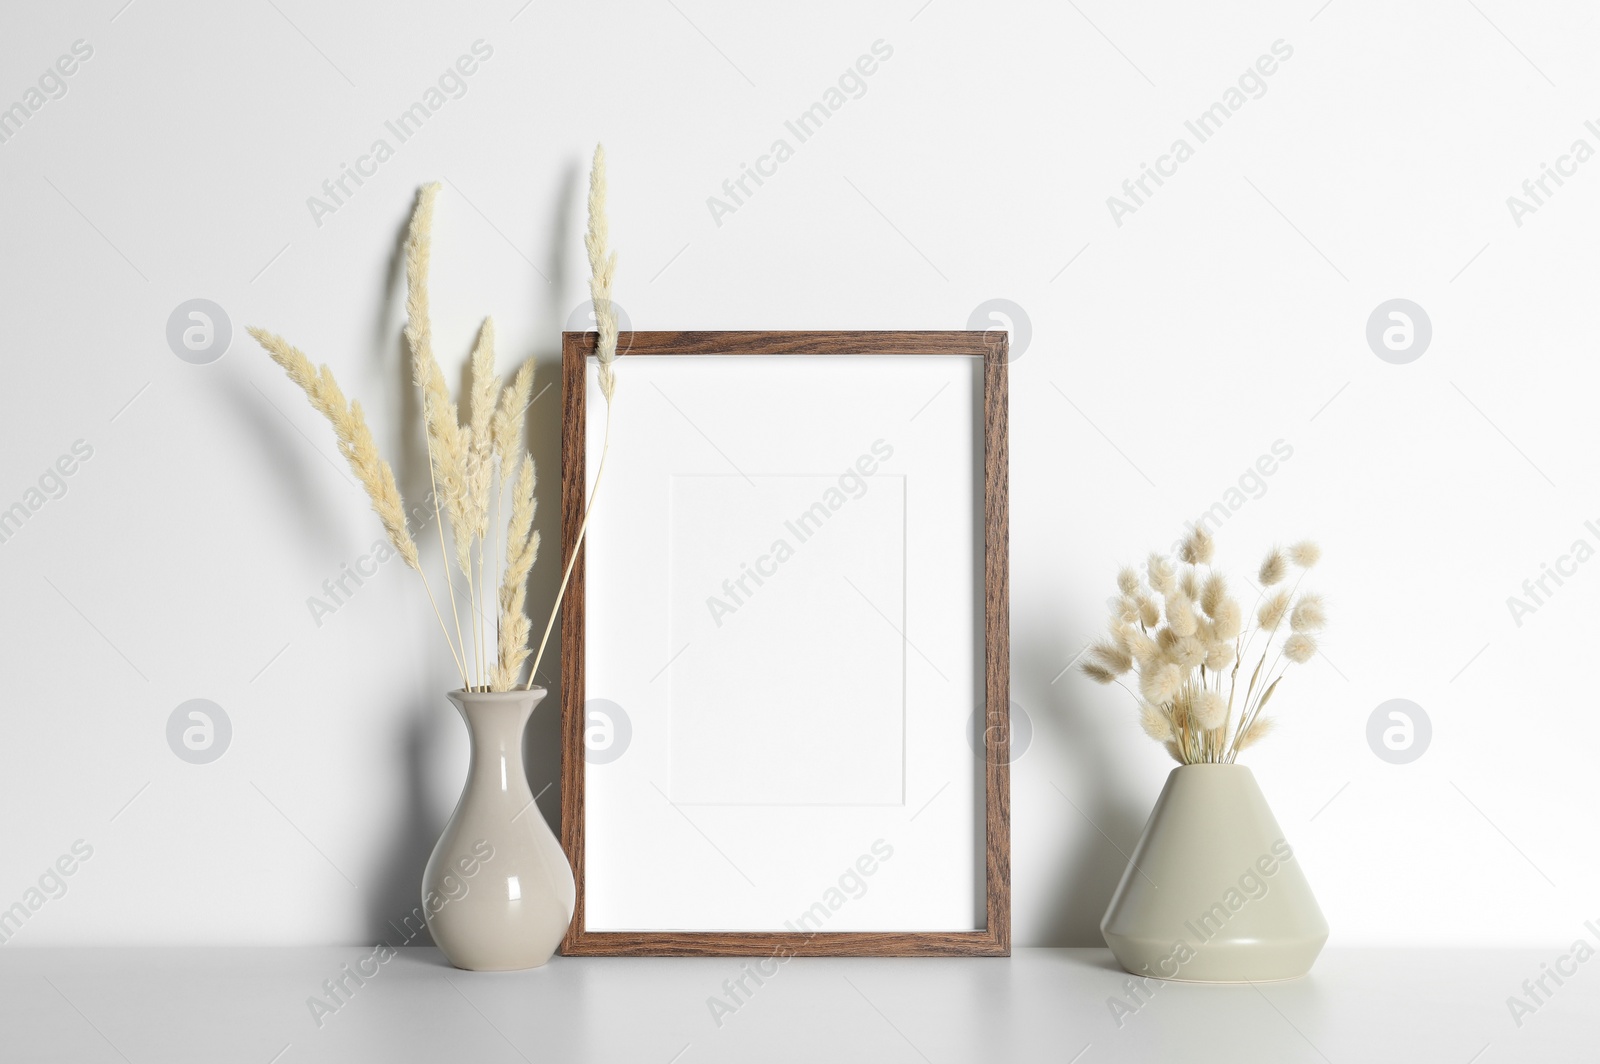 Photo of Empty photo frame and vases with dry decorative spikes on white table. Mockup for design